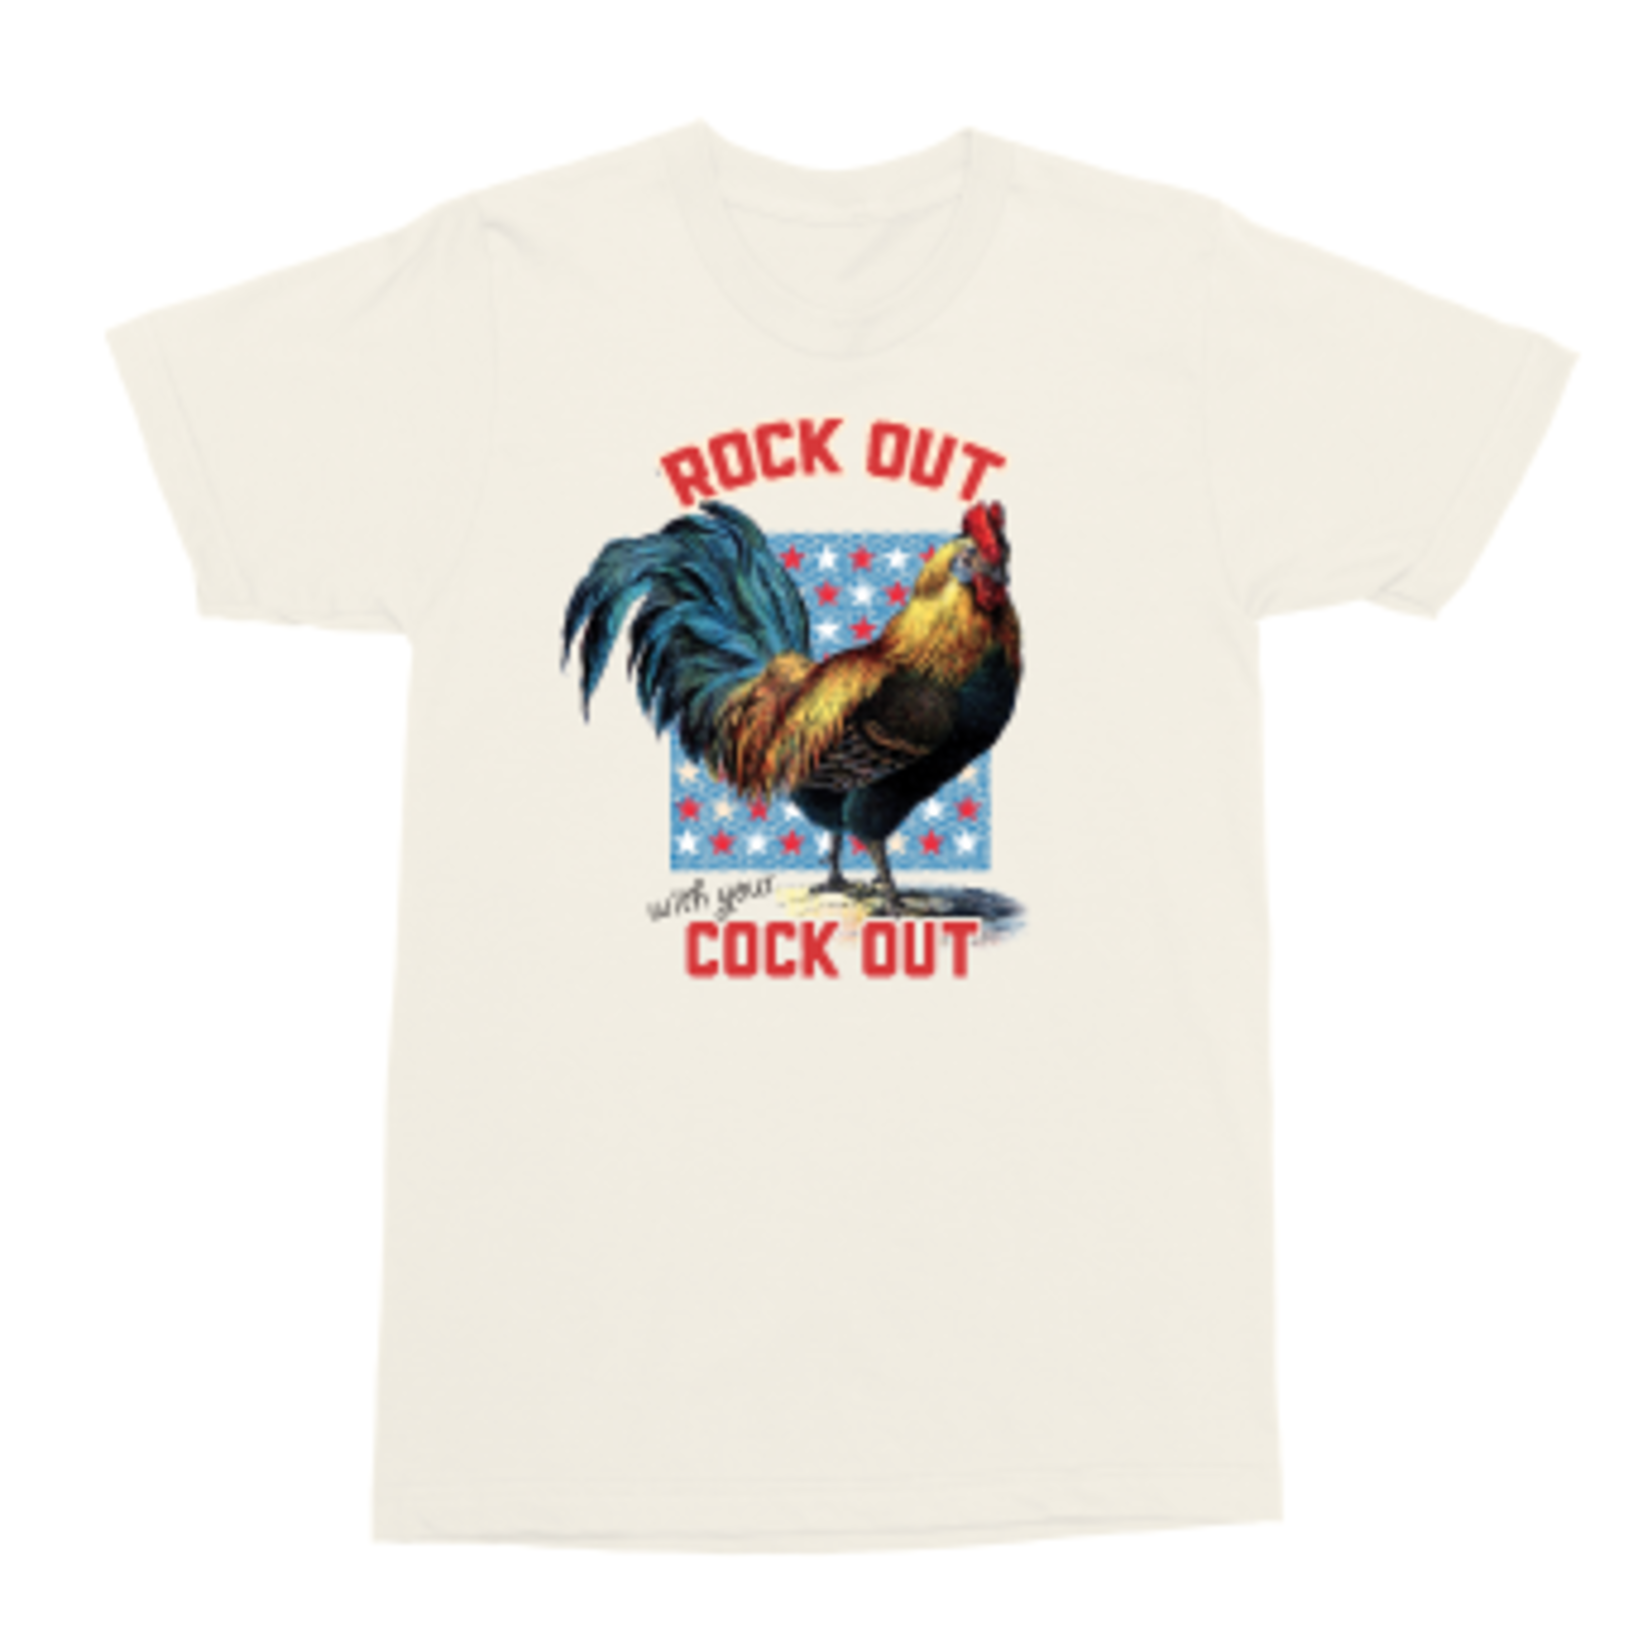 Rock Out With Your Cock Out